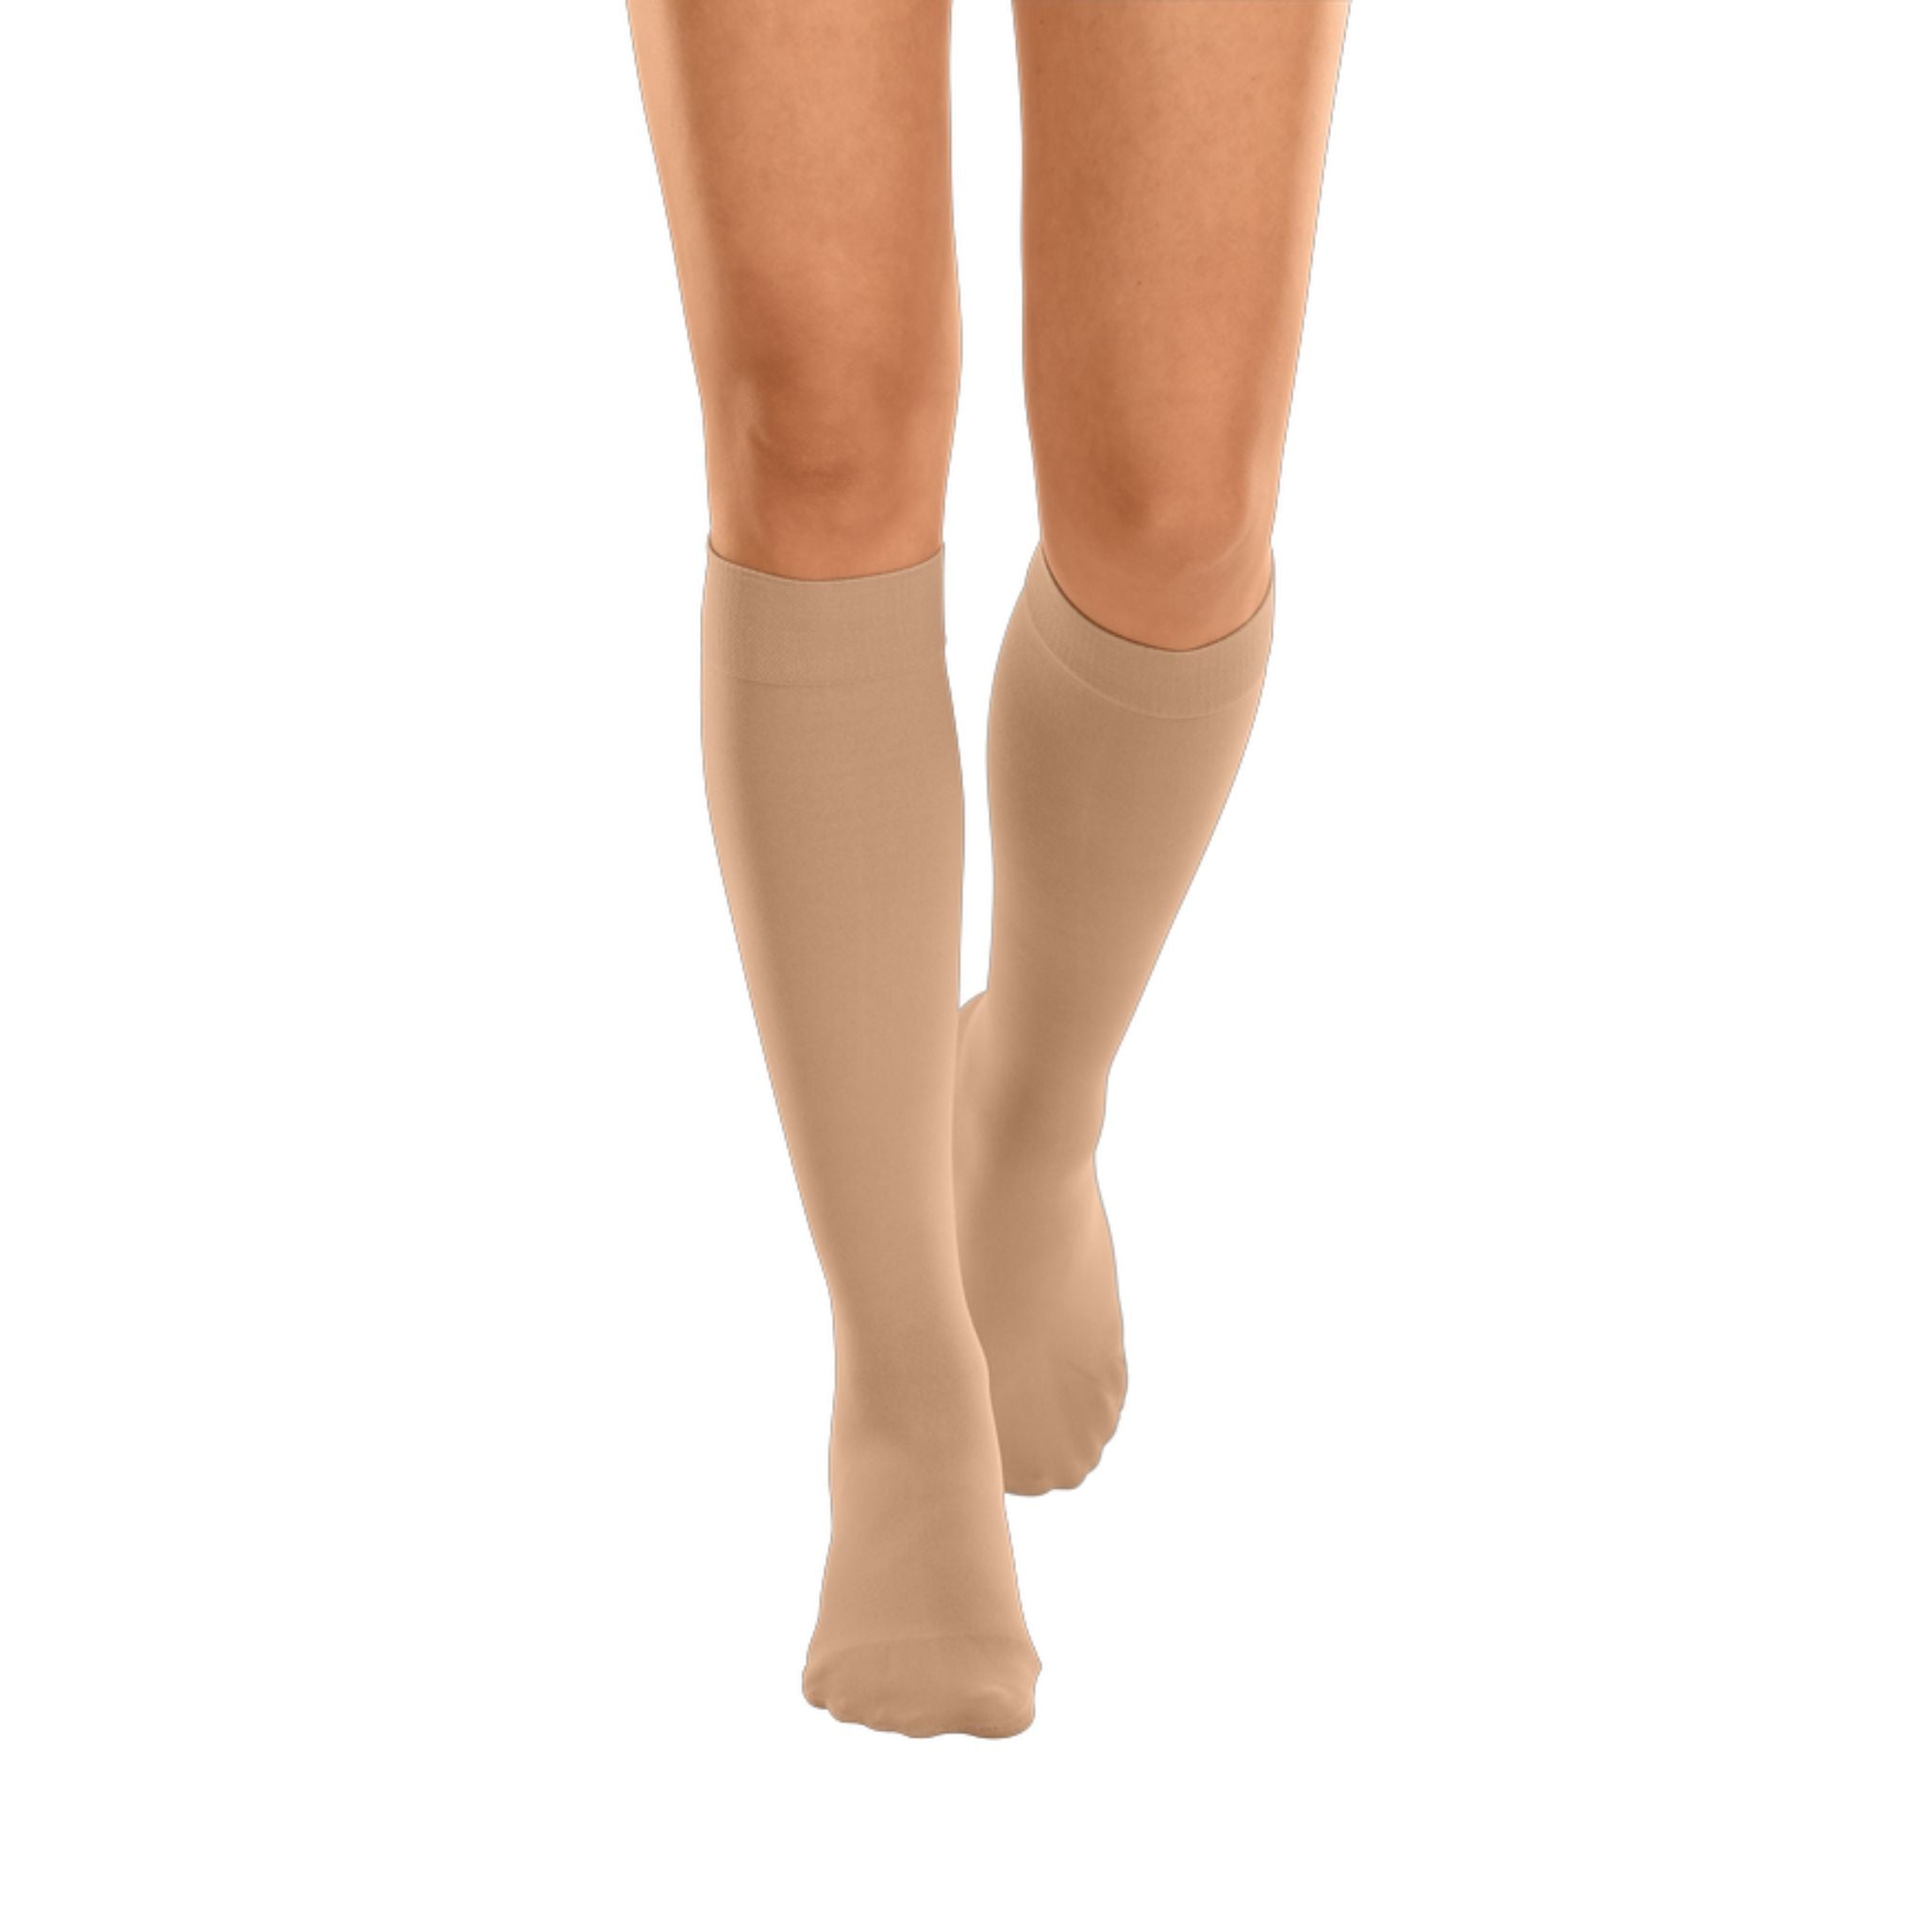 Compression Stockings  Below Knee  Closed Toe  Caramel  mediven cotton